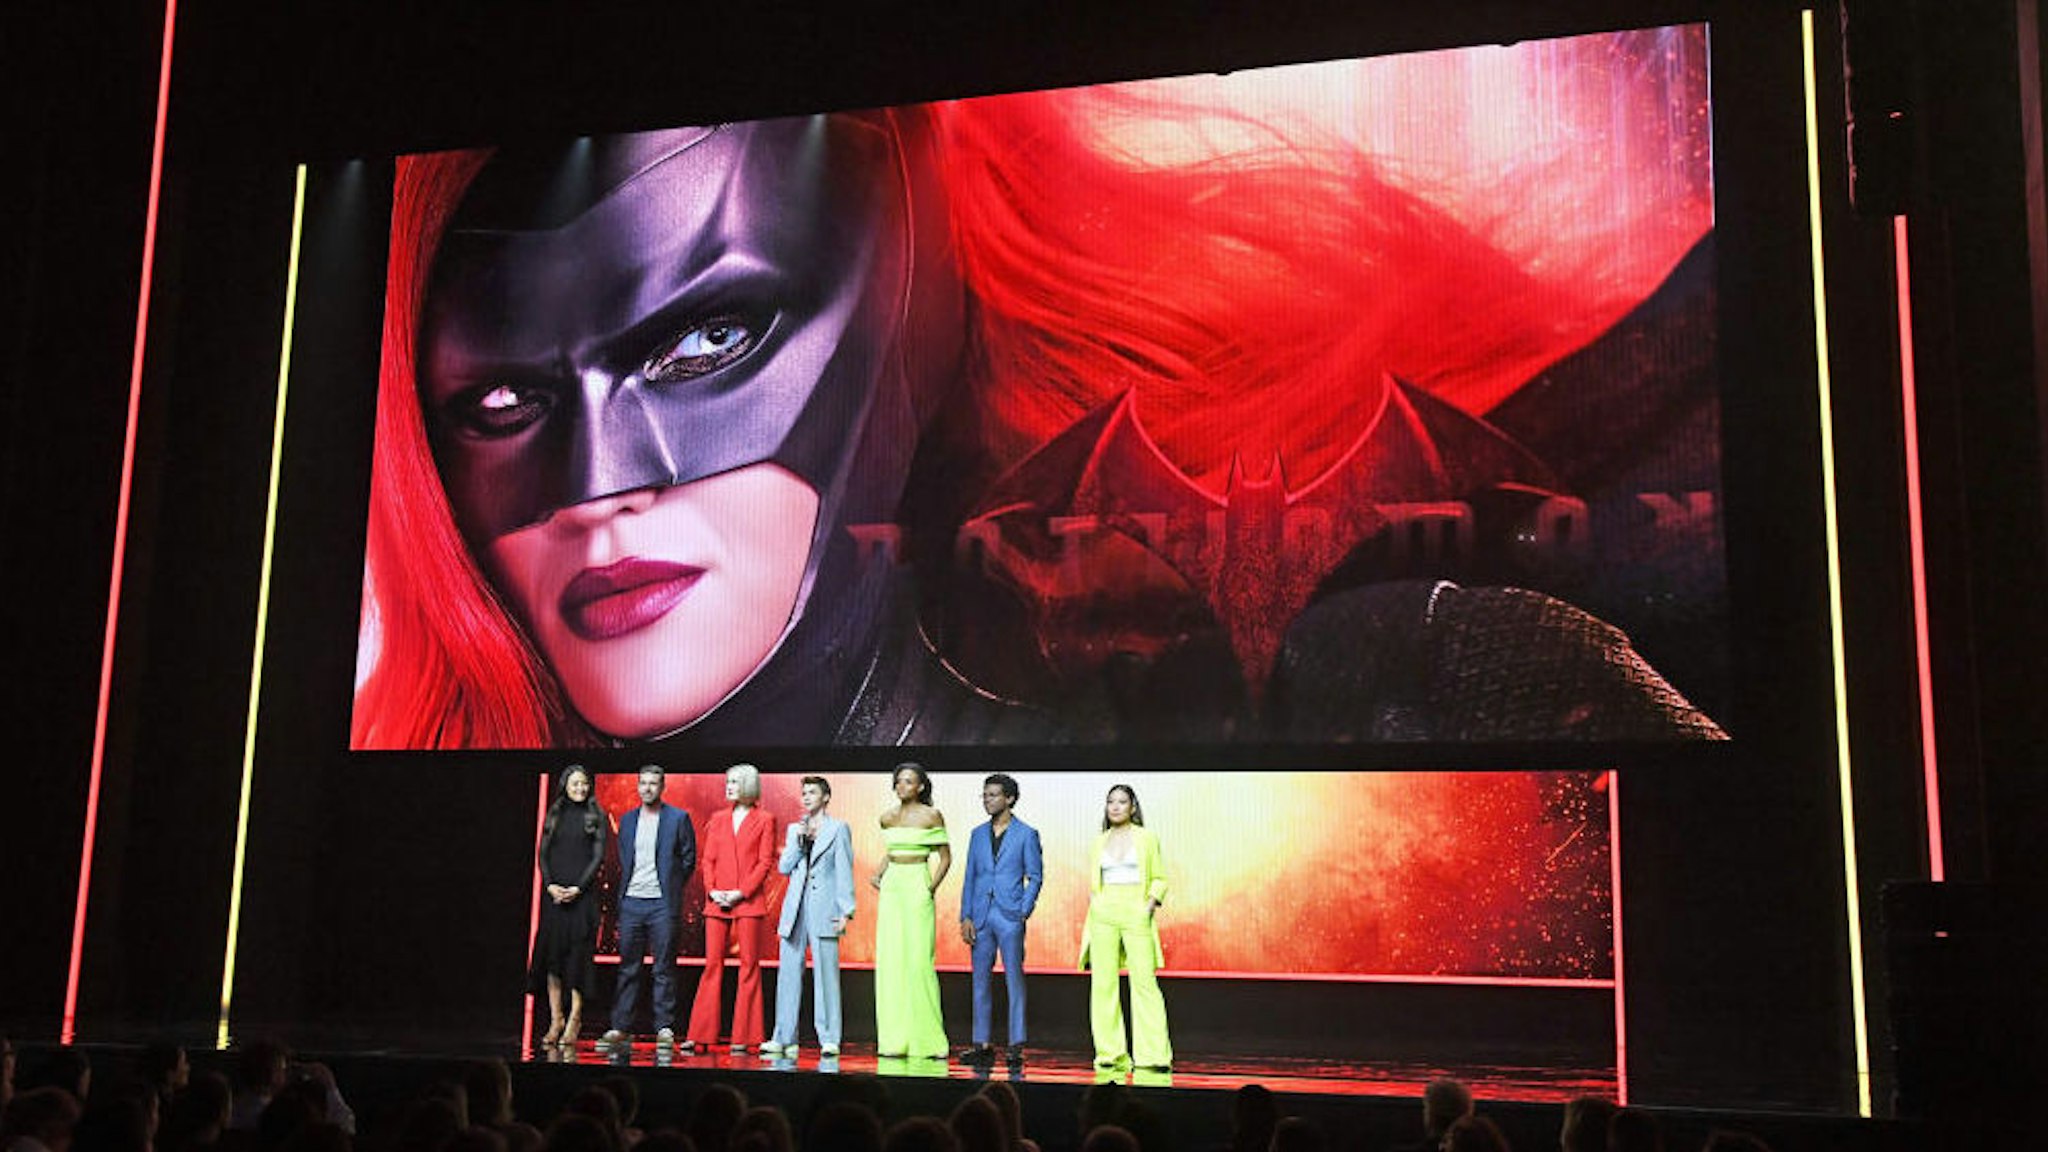 Elizabeth Anweis, Rachel Skarsten, Ruby Rose, Meagan Tandy, Camrus Johnson, and Nicole Kang of "Batwoman" speak onstage during the The CW Network 2019 Upfronts at New York City Center on May 16, 2019 in New York City. (Photo by Kevin Mazur/Getty Images for The CW Network)